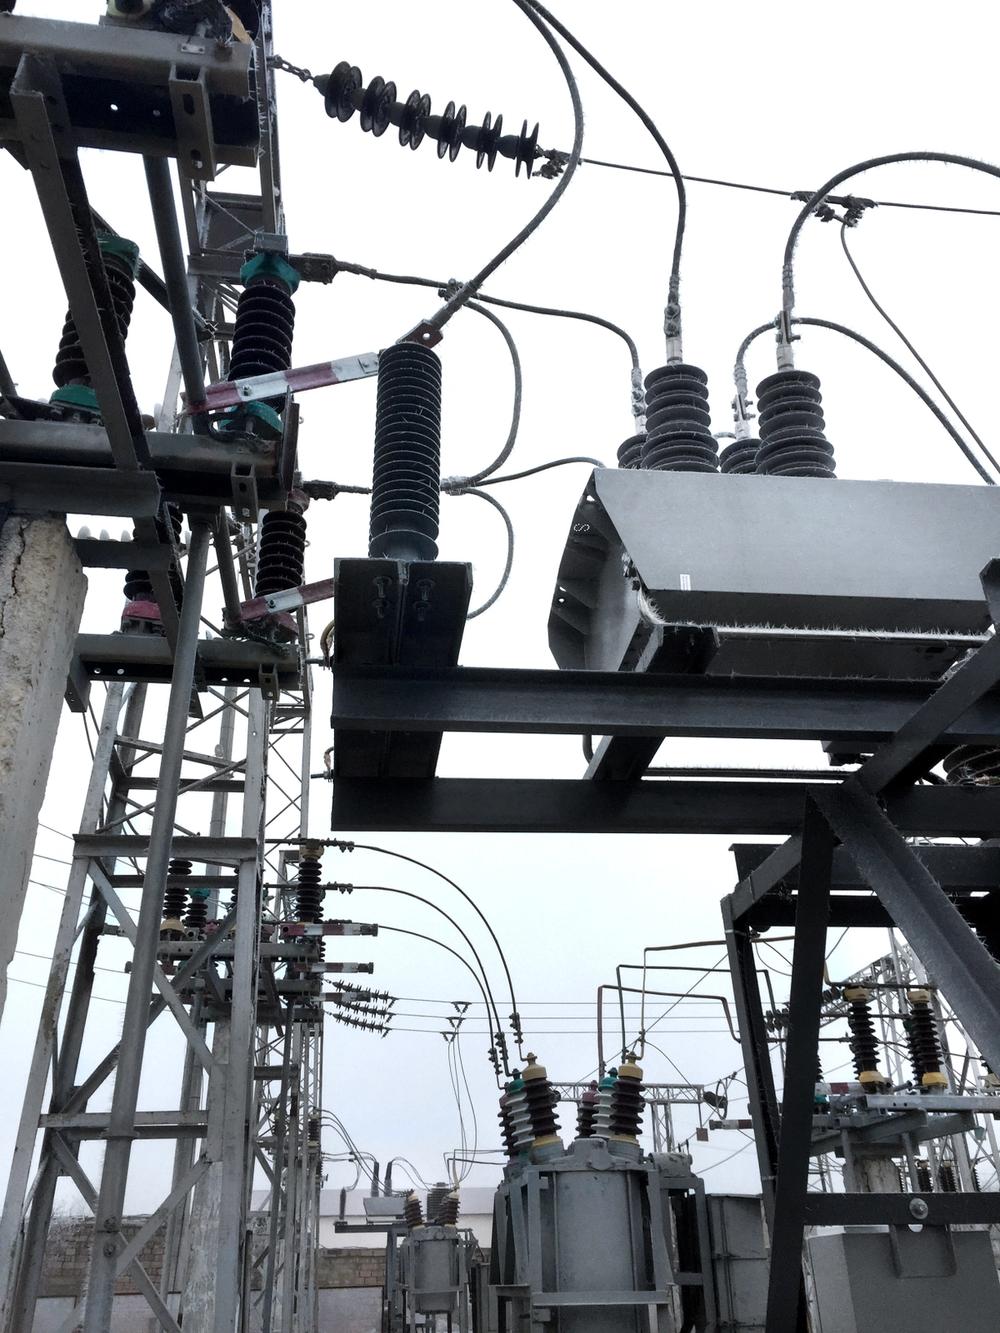 Close up of NOJA Power Recloser in substation system